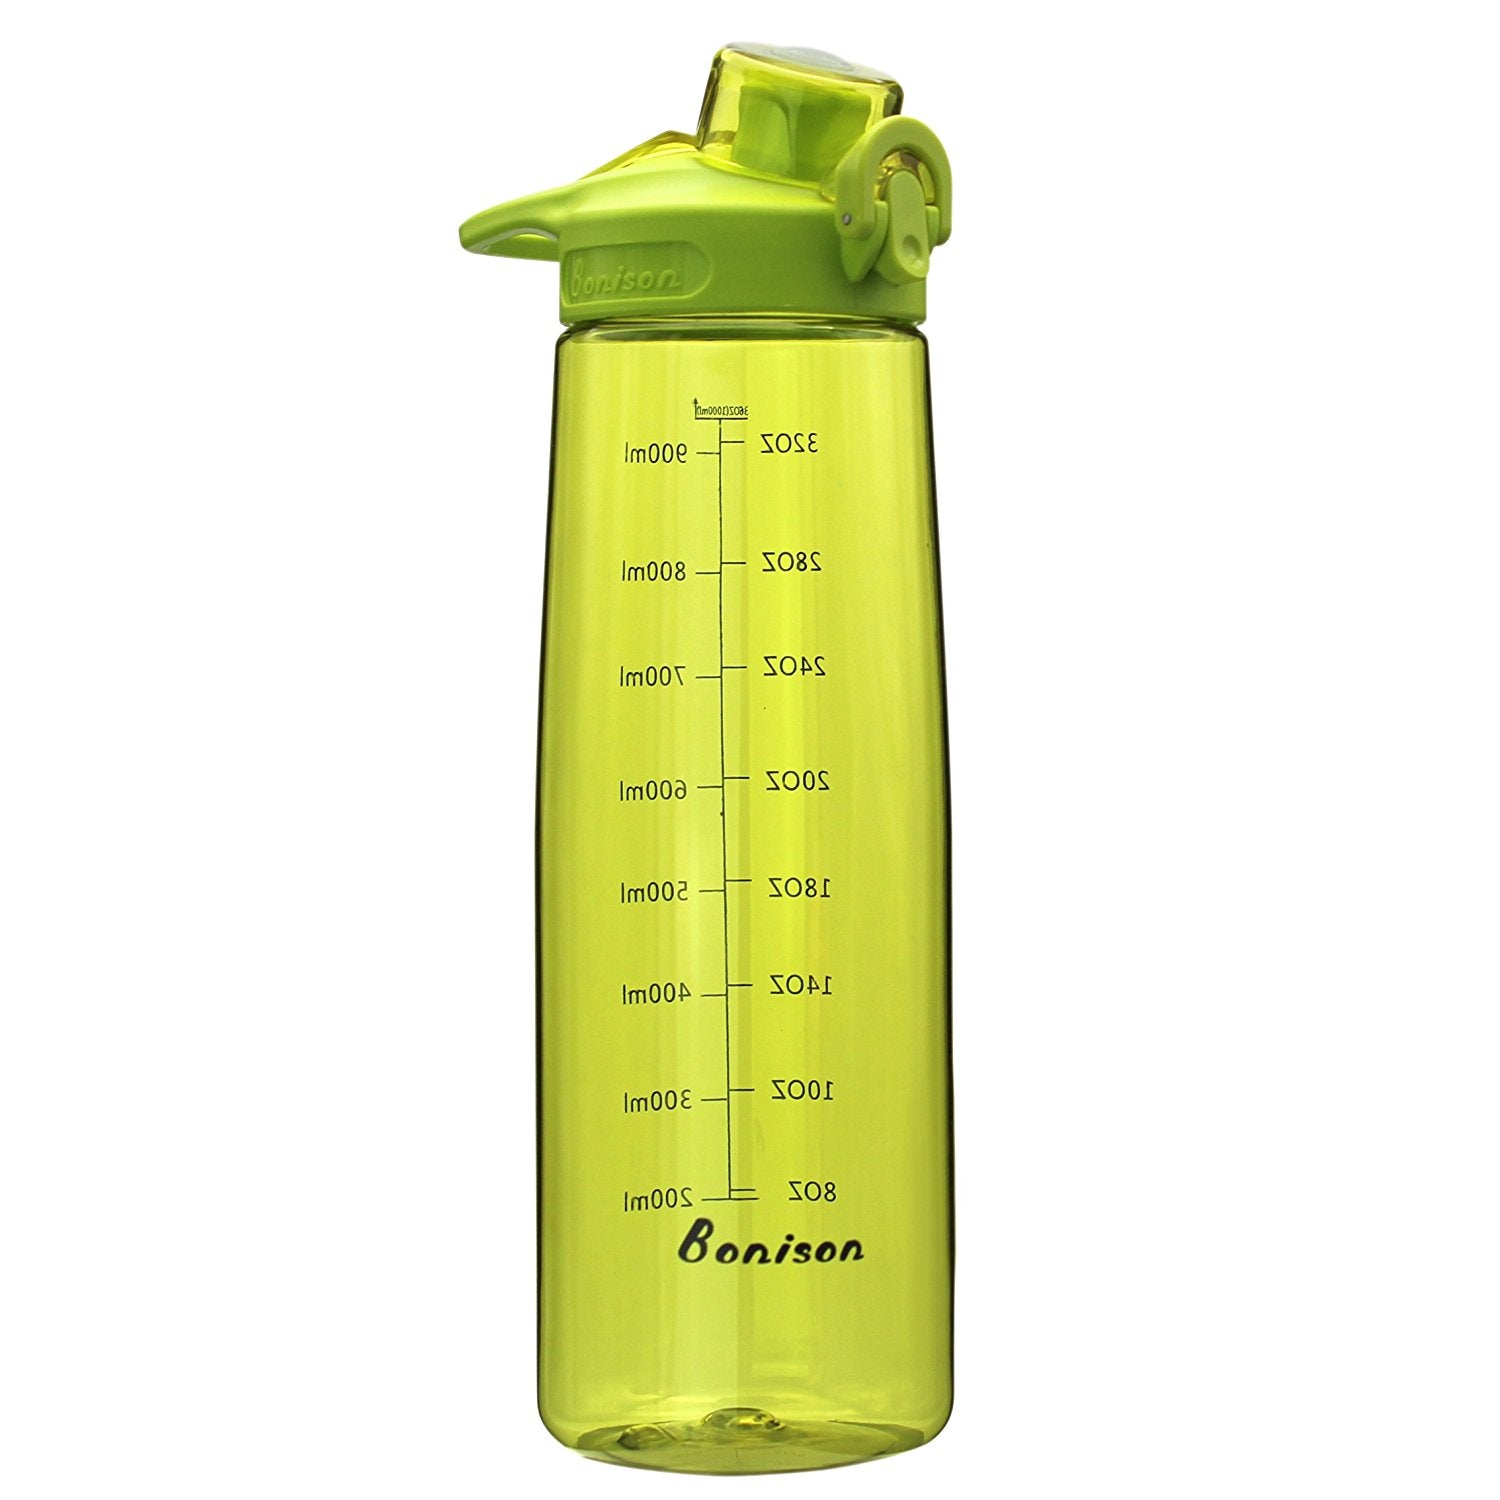 Bonison 36 OZ Sports Bottle Water With Flip Top Lid Leak Proof Bpa Free Drinking Water Bottle, for Travel Yoga Running Outdoor Cycling and Camping - Green